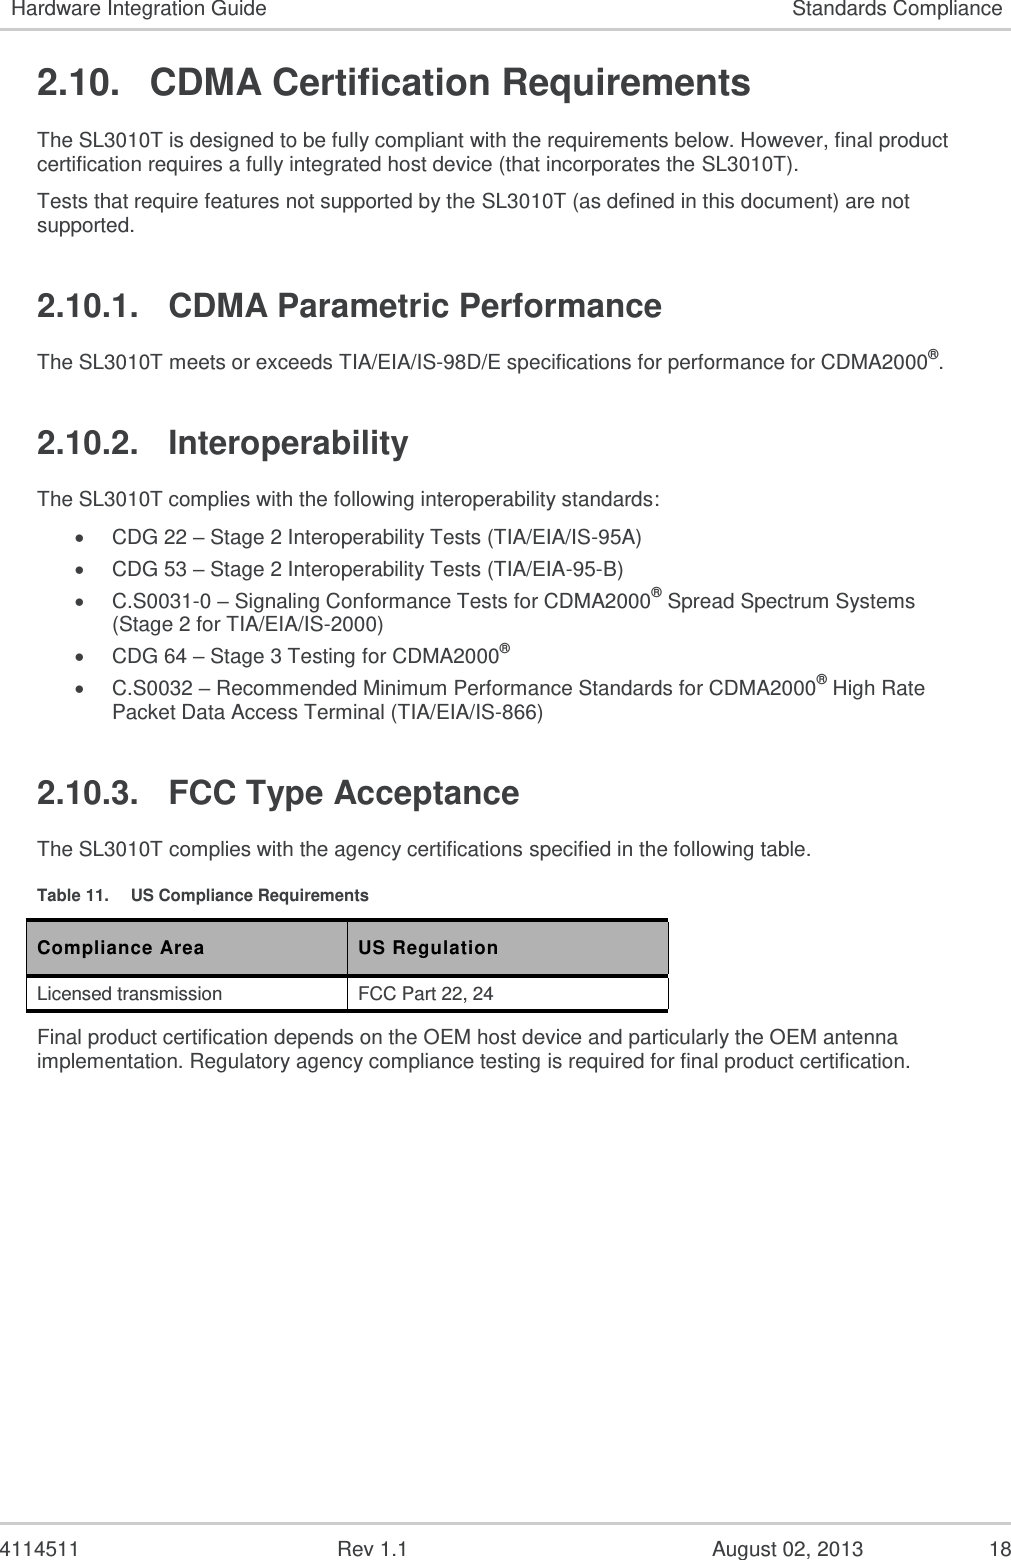   4114511  Rev 1.1  August 02, 2013  16 Hardware Integration Guide Standards Compliance 2.7.  Over-The-Air Service Provisioning (OTASP) 2.7.1. IS-683 Features The SL3010T supports TIA/EIA/IS-683-A for Over-the-Air Service-Provisioning (OTASP) and Parameter Administration (OTAPA) as summarized in the following table. The SL3010T also complies with carrier specific OTASP and OTAPA requirements. Table 8.  OTASP/OTAPA Features Feature Supported? OTASP (user initiated) Yes* OTAPA (network initiated) Yes NAM Parameter Download Yes Preferred Roaming List (PRL) Download Yes A-Key Exchange Yes OTAPA NAM Lock Yes Re-Authenticate Messaging Yes Protocol Capability Messaging Yes *    Host support is required for this feature. 2.7.2.  Internet Over The Air (IOTA) Features The SL3010T firmware includes an embedded IOTA client that includes the following support:  Automatically initiates and attempts to complete an IOTA session in the SL3010T when the network initiates an IOTA session.  Provides an interface to the host to request the SL3010T to initiate and attempt a client initiated IOTA session.  Provides notifications to the host of status and results of the current IOTA session in the SL3010T.  Provides an interface to the host to cancel, at any time, an active IOTA session running in the SL3010T.  IOTA feature support is defined in the following table. Table 9.  IOTA Features Feature Supported? Bootstrap Provisioning Yes* Network Initiated Provisioning using WAP Push Yes Reassembly of Multiple IOTA Trigger Messages Yes HTTP and SSL Support (Download Agent) Yes MMC XML and MIME Parser / Assembler Yes IS-683-A/B Tunneling Yes WBXML Parser / Assembler Yes 